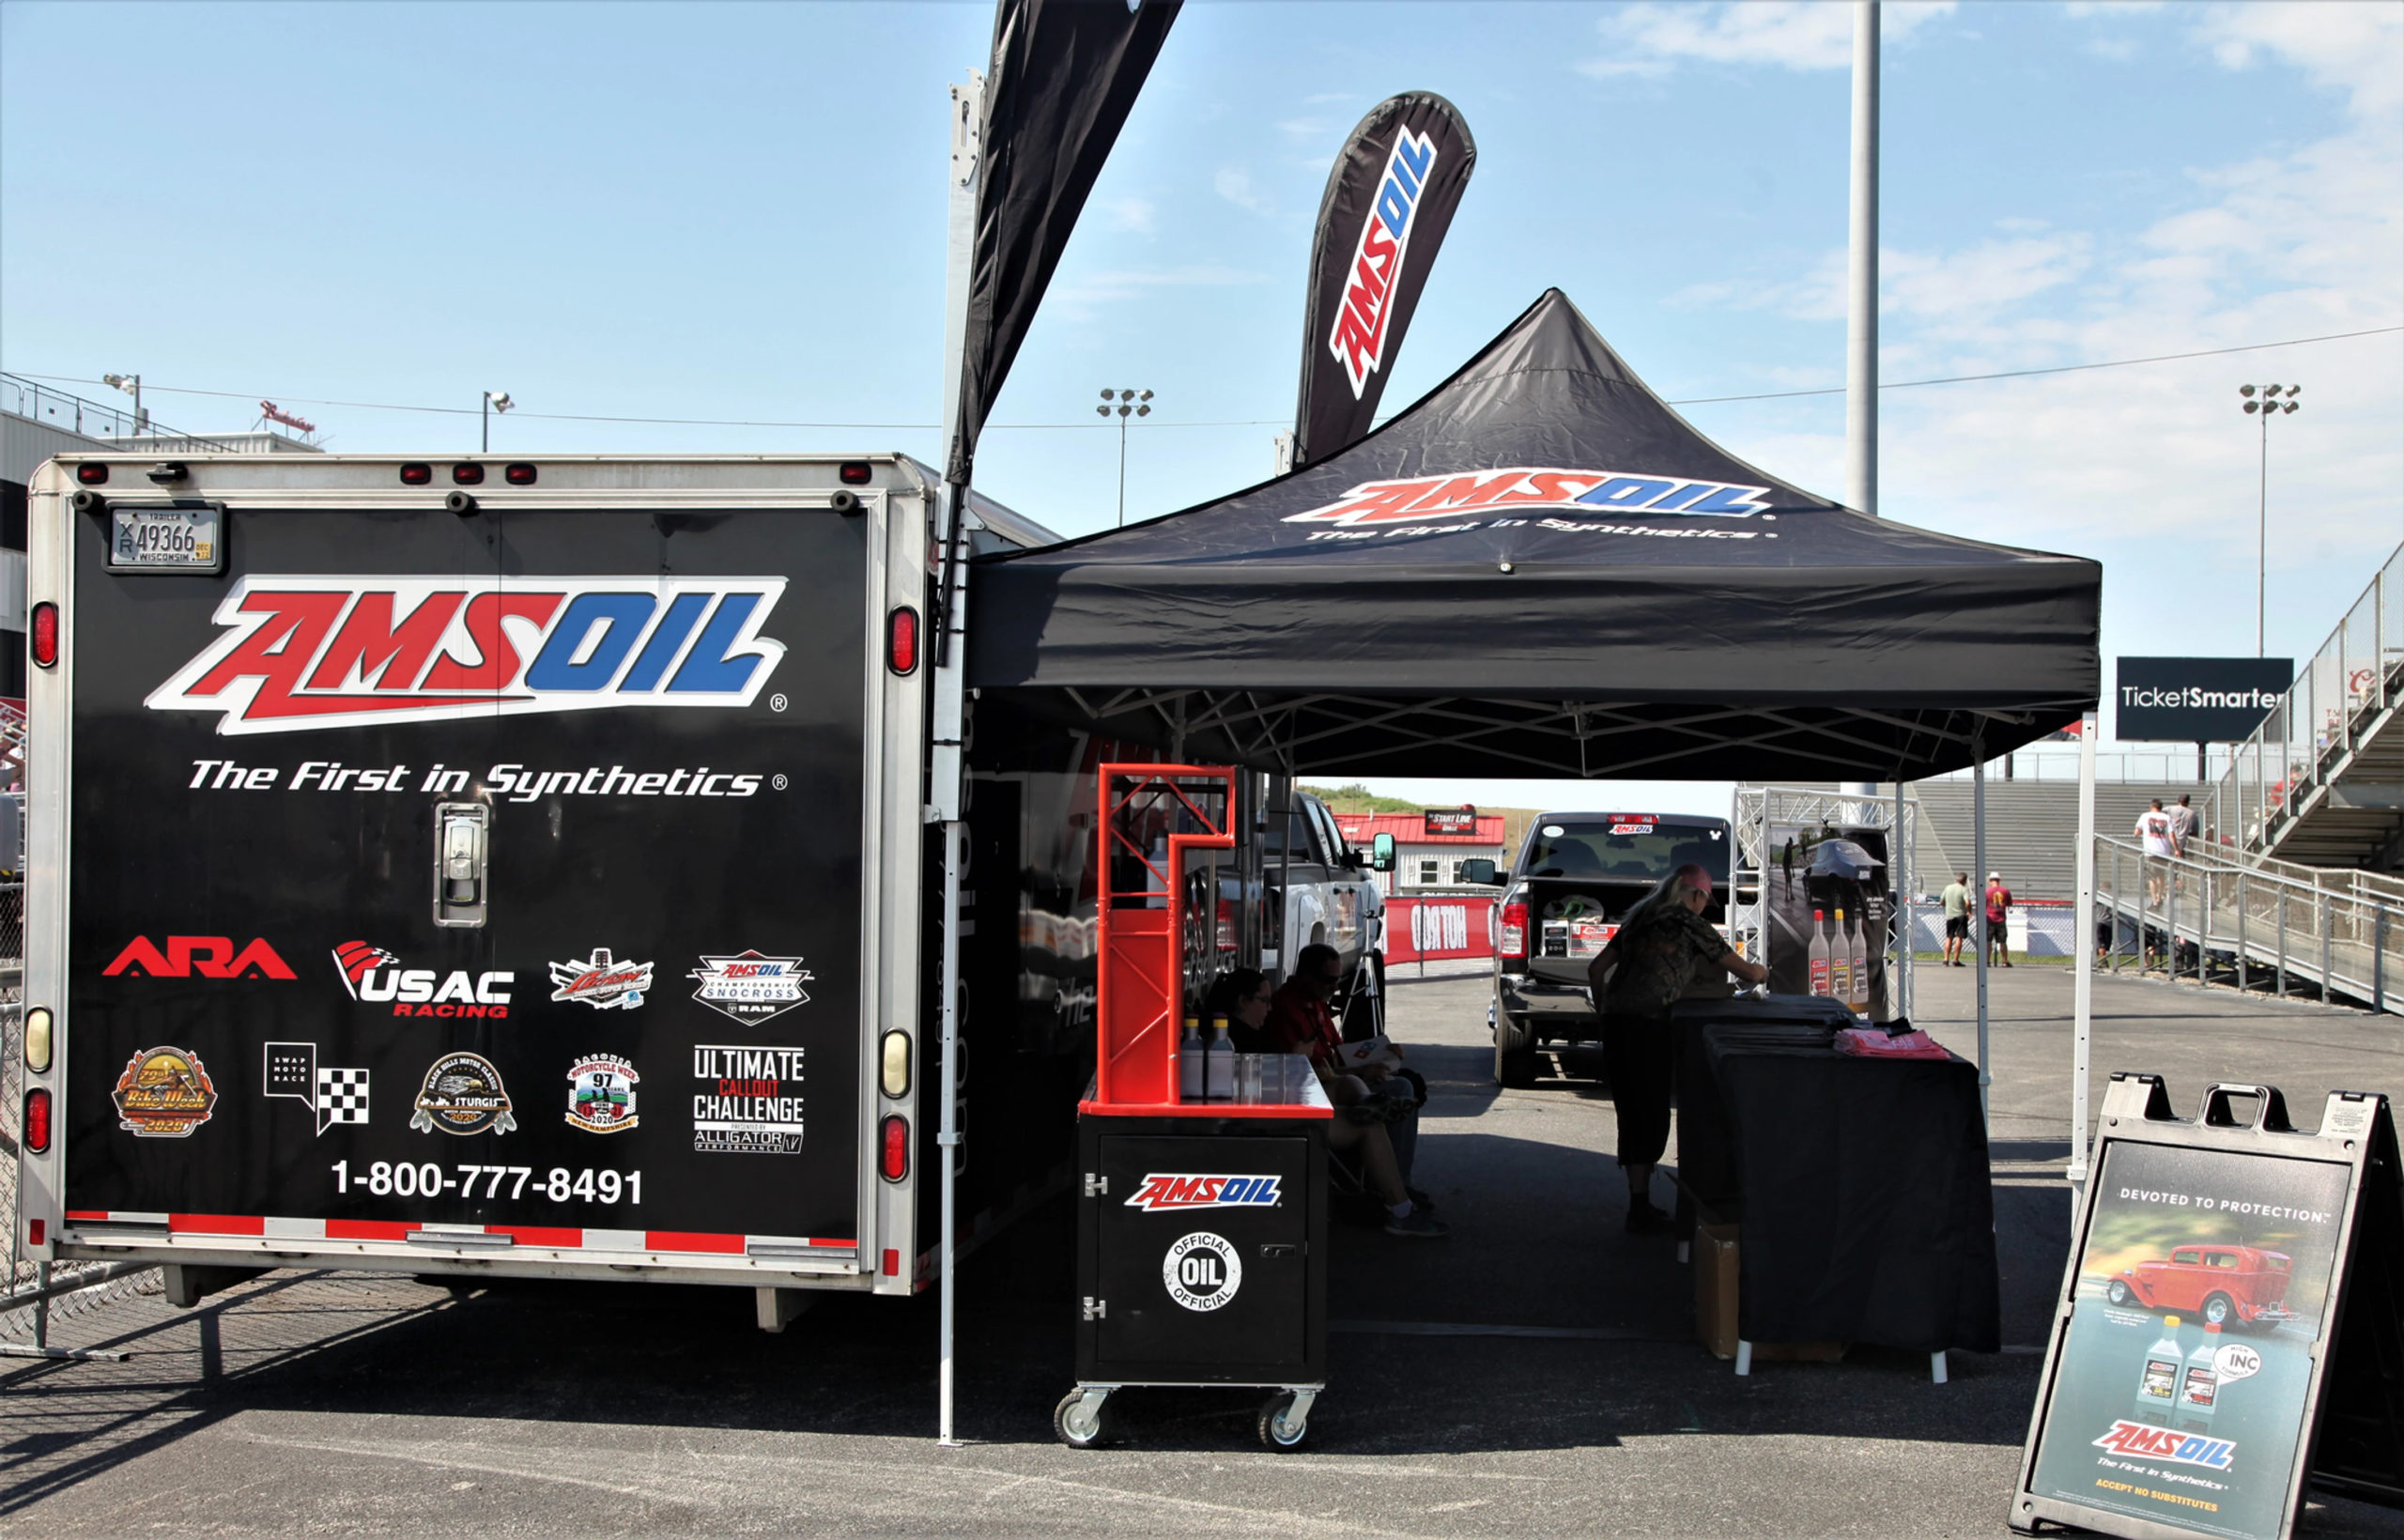 AMSOIL booth at Hot Rod Drag Week 2022